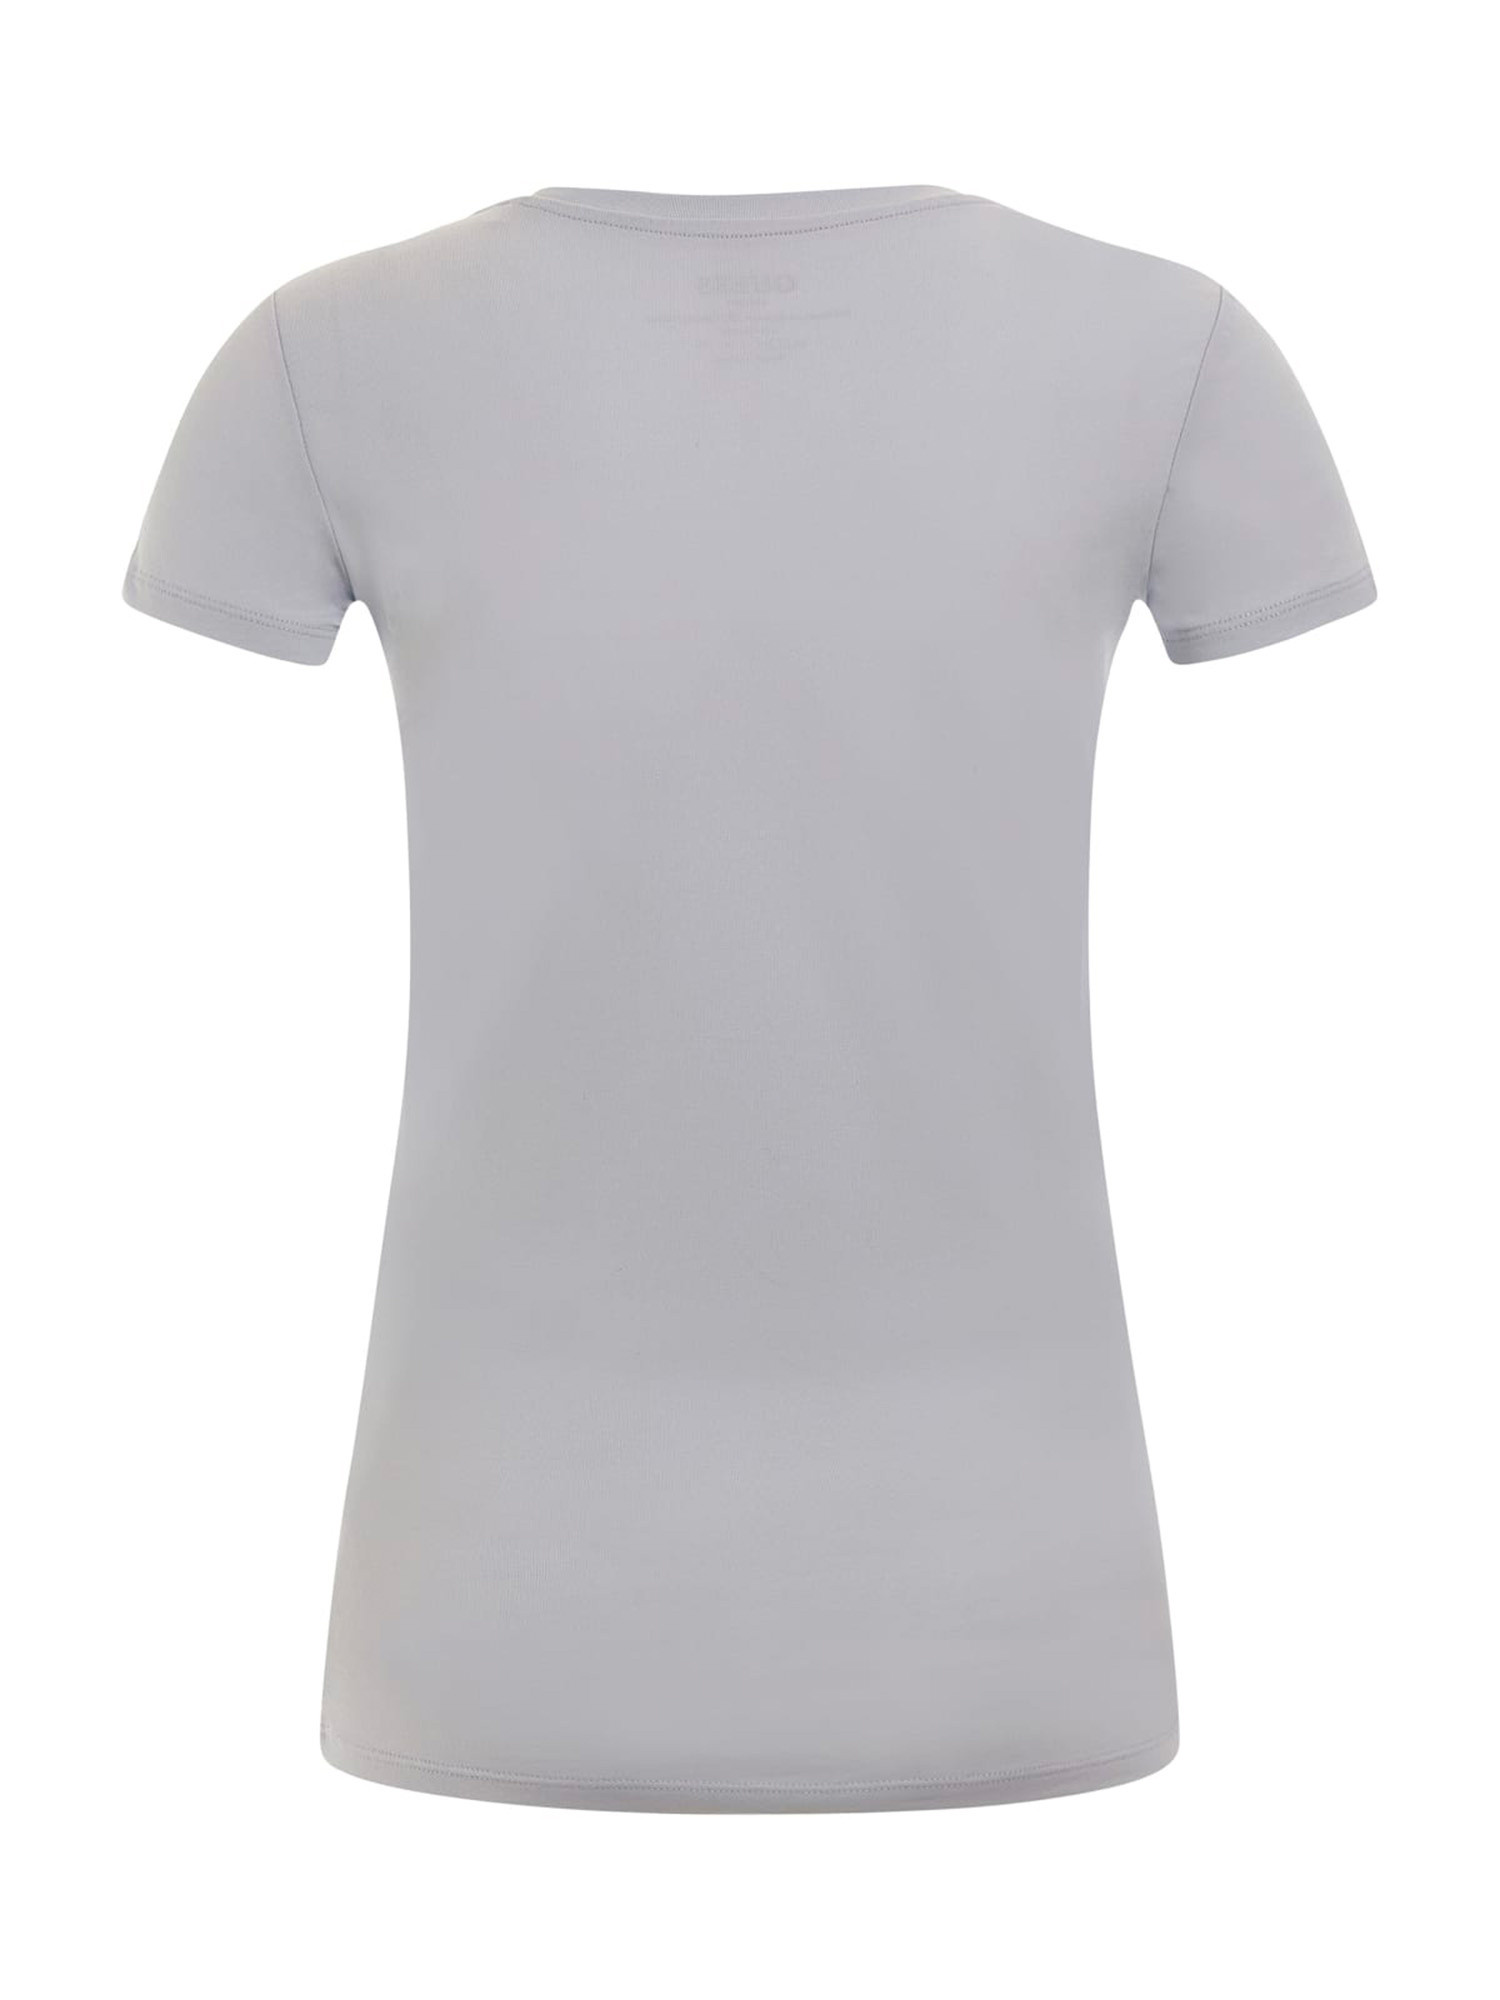 Guess - T-shirt con logo con strass slim fit, Bianco, large image number 1